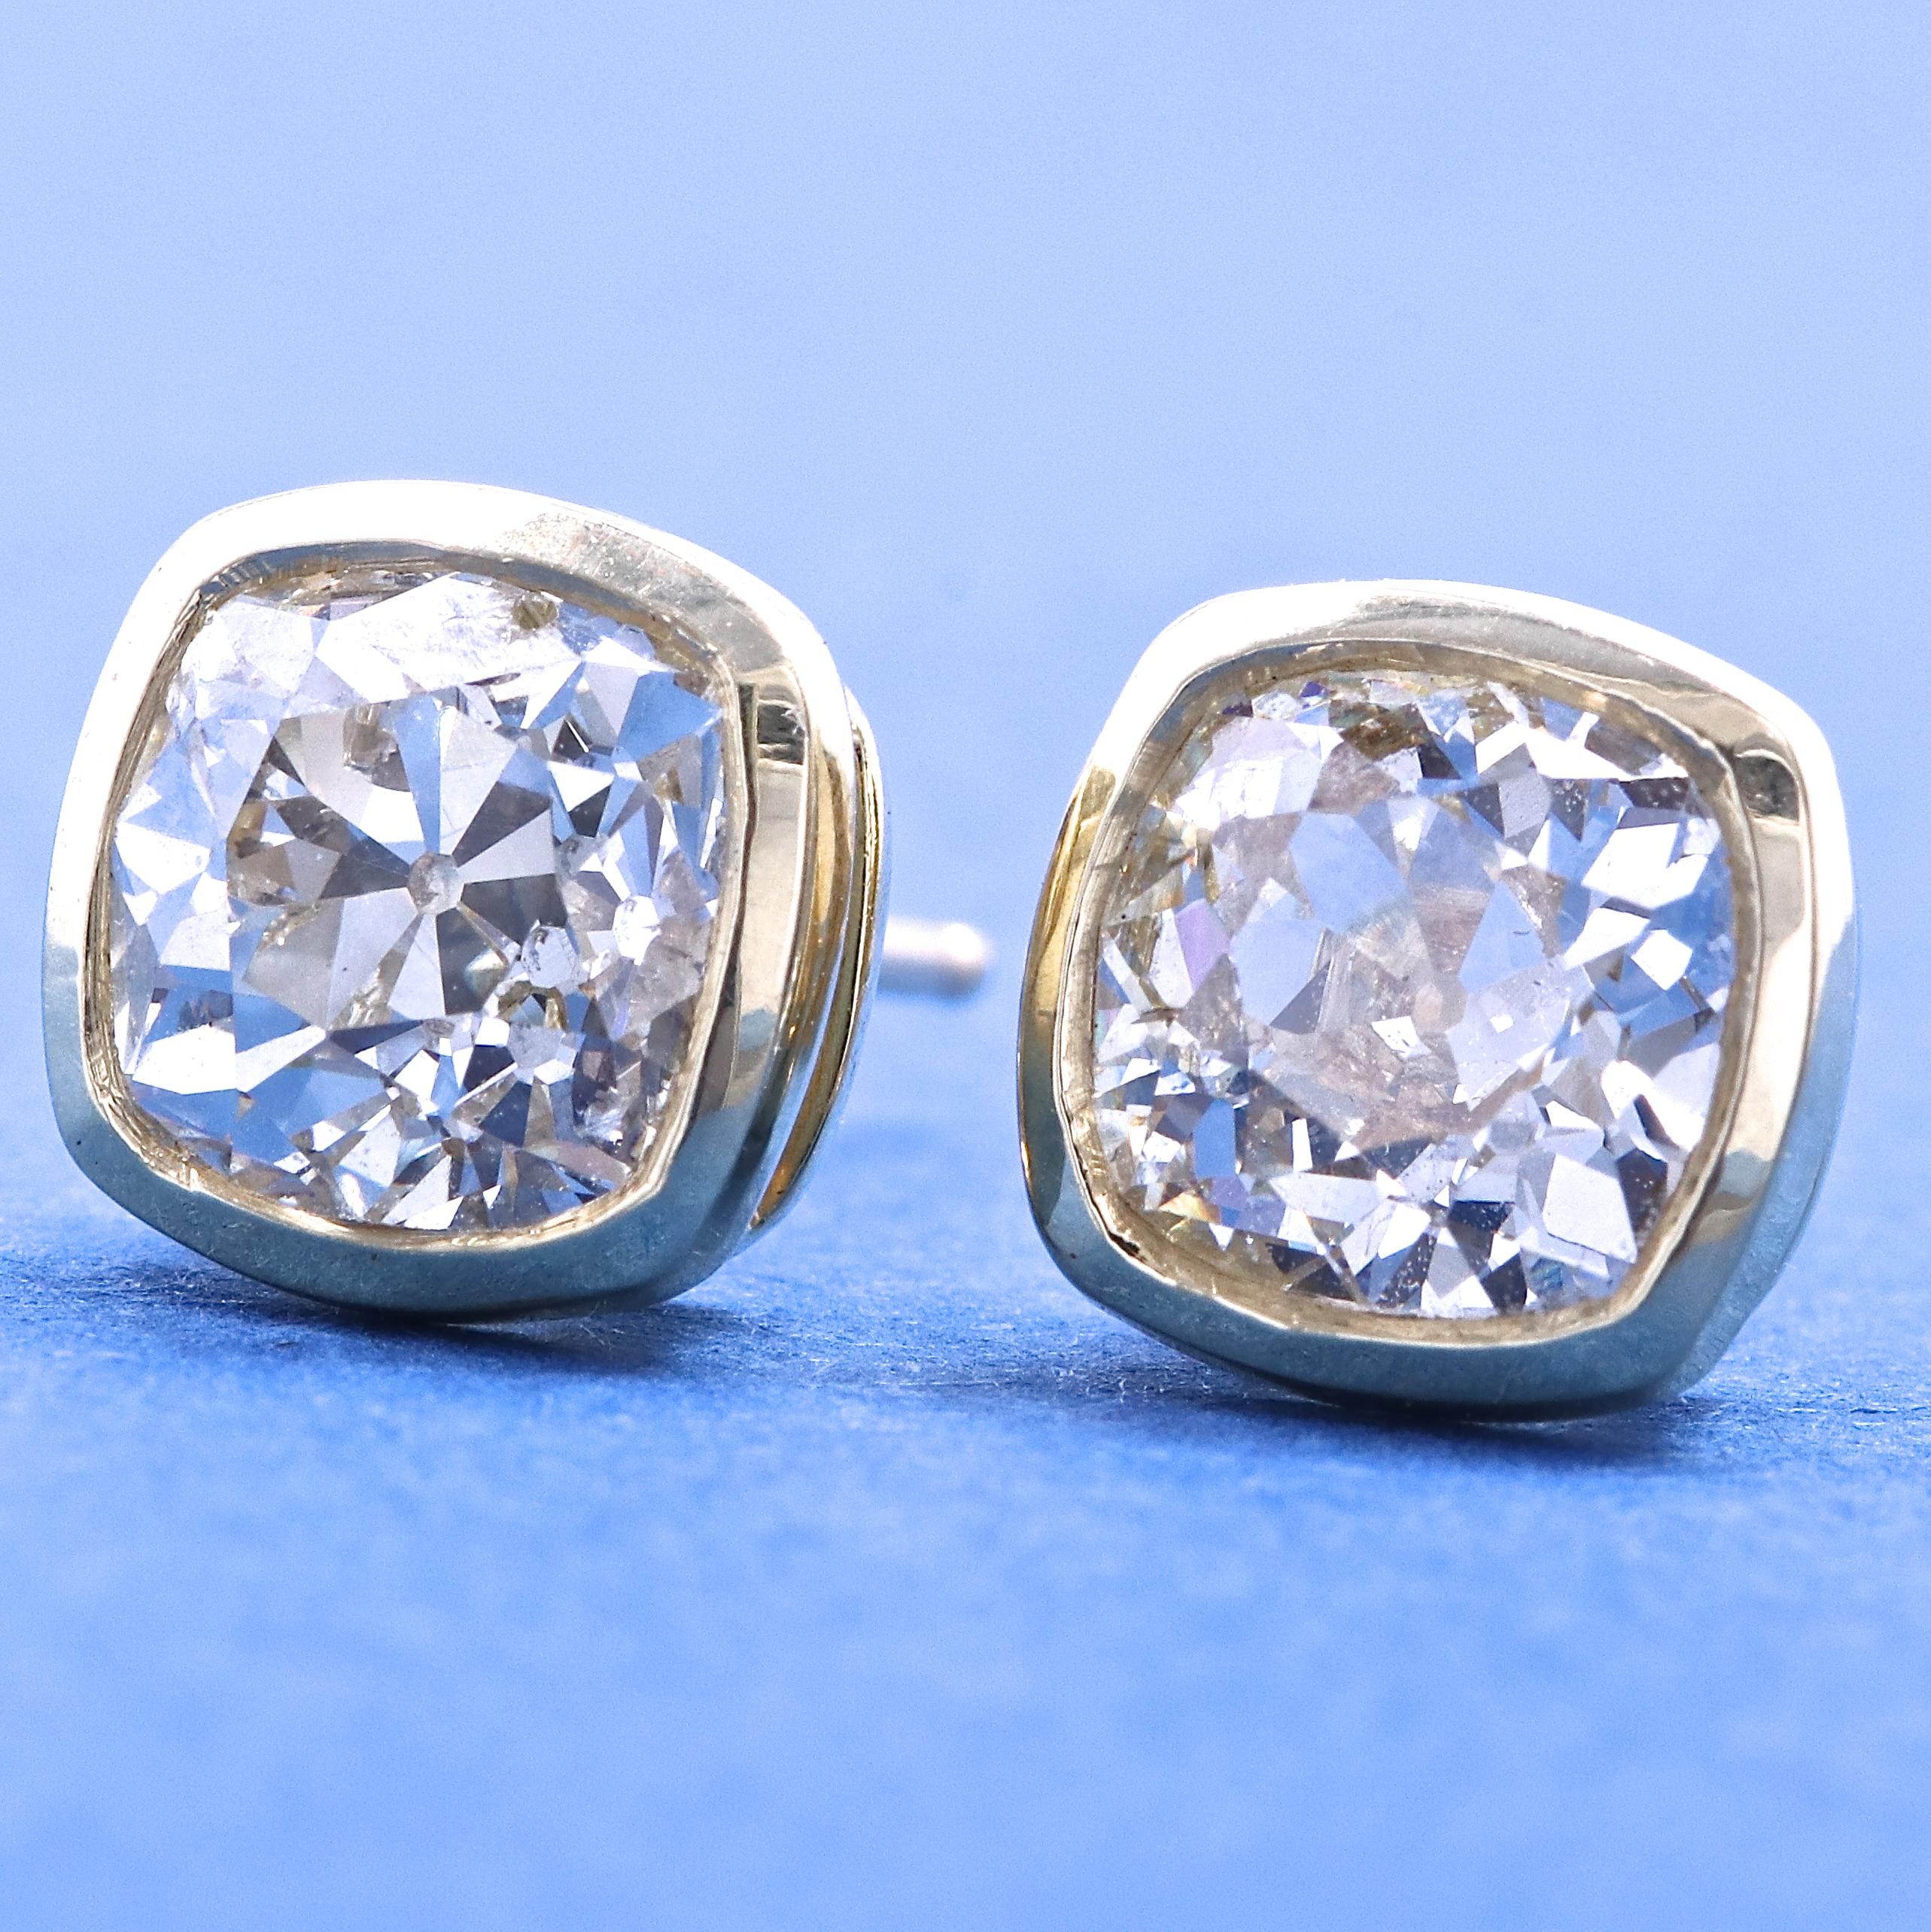 We all need a pair of great diamond studs. We've added rich 18k gold bezels to these stunning old mine cut diamonds to create studs that rock the best of old world charm and contemporary design. These diamond stud earrings feature a total of 2.31